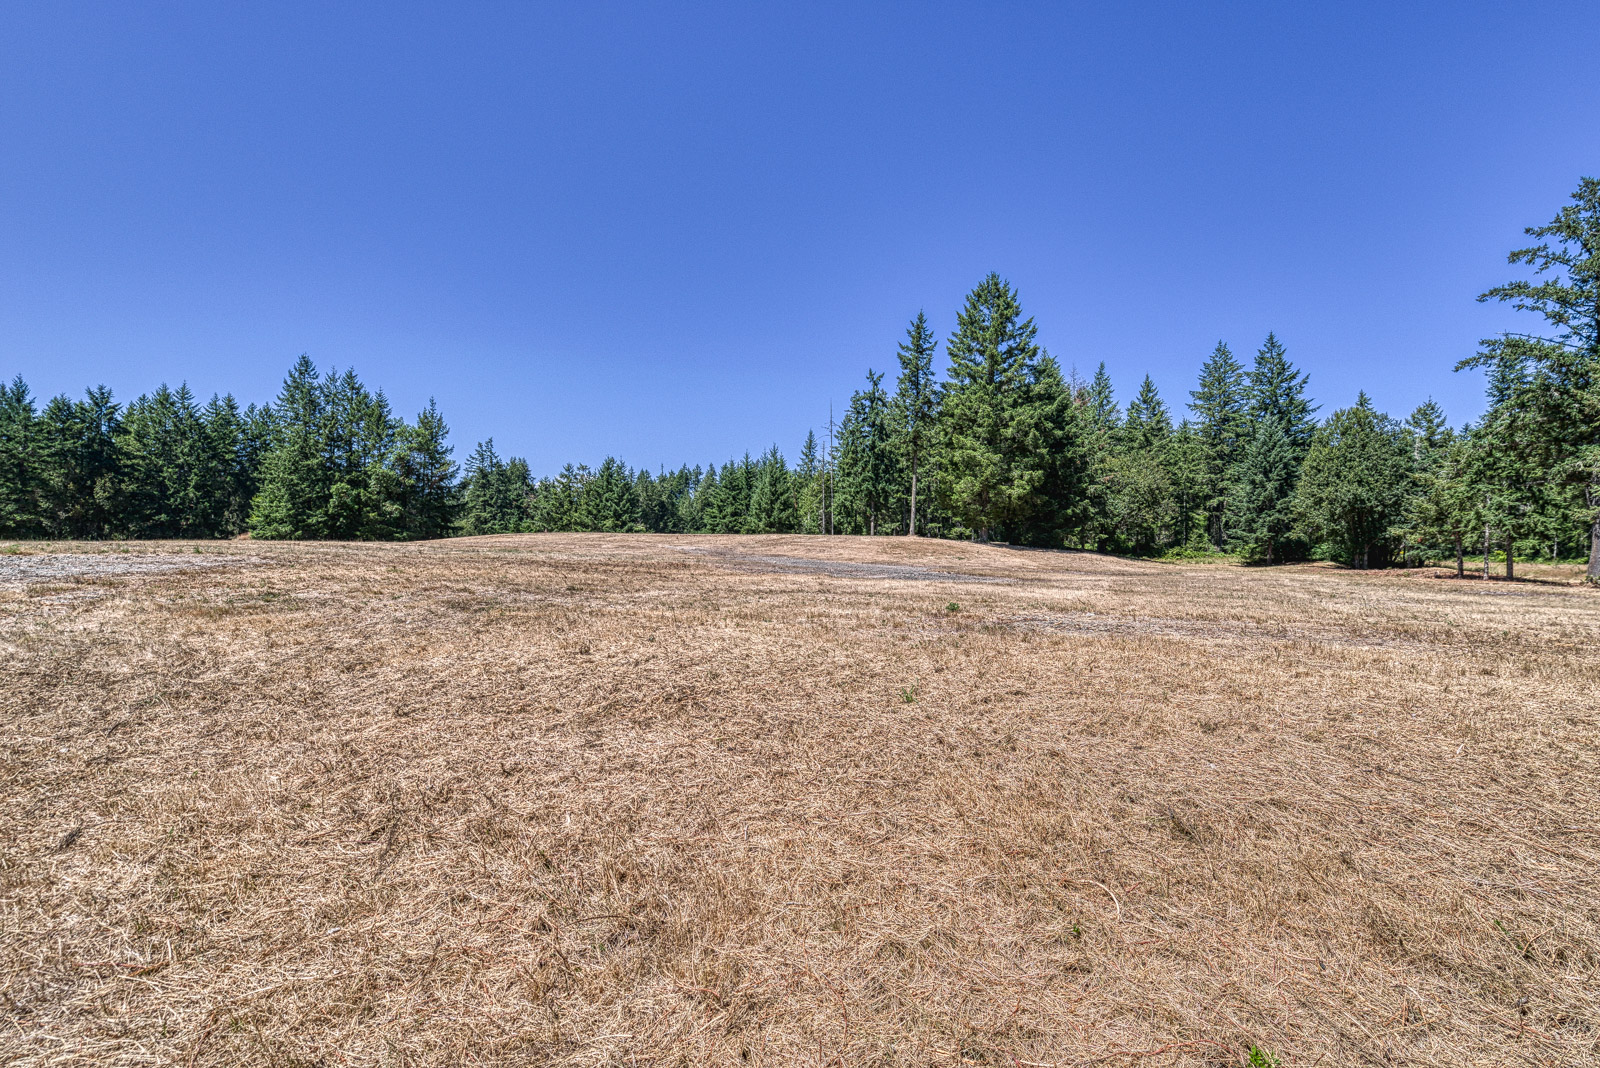 grassy acreage with trees in gig harbor